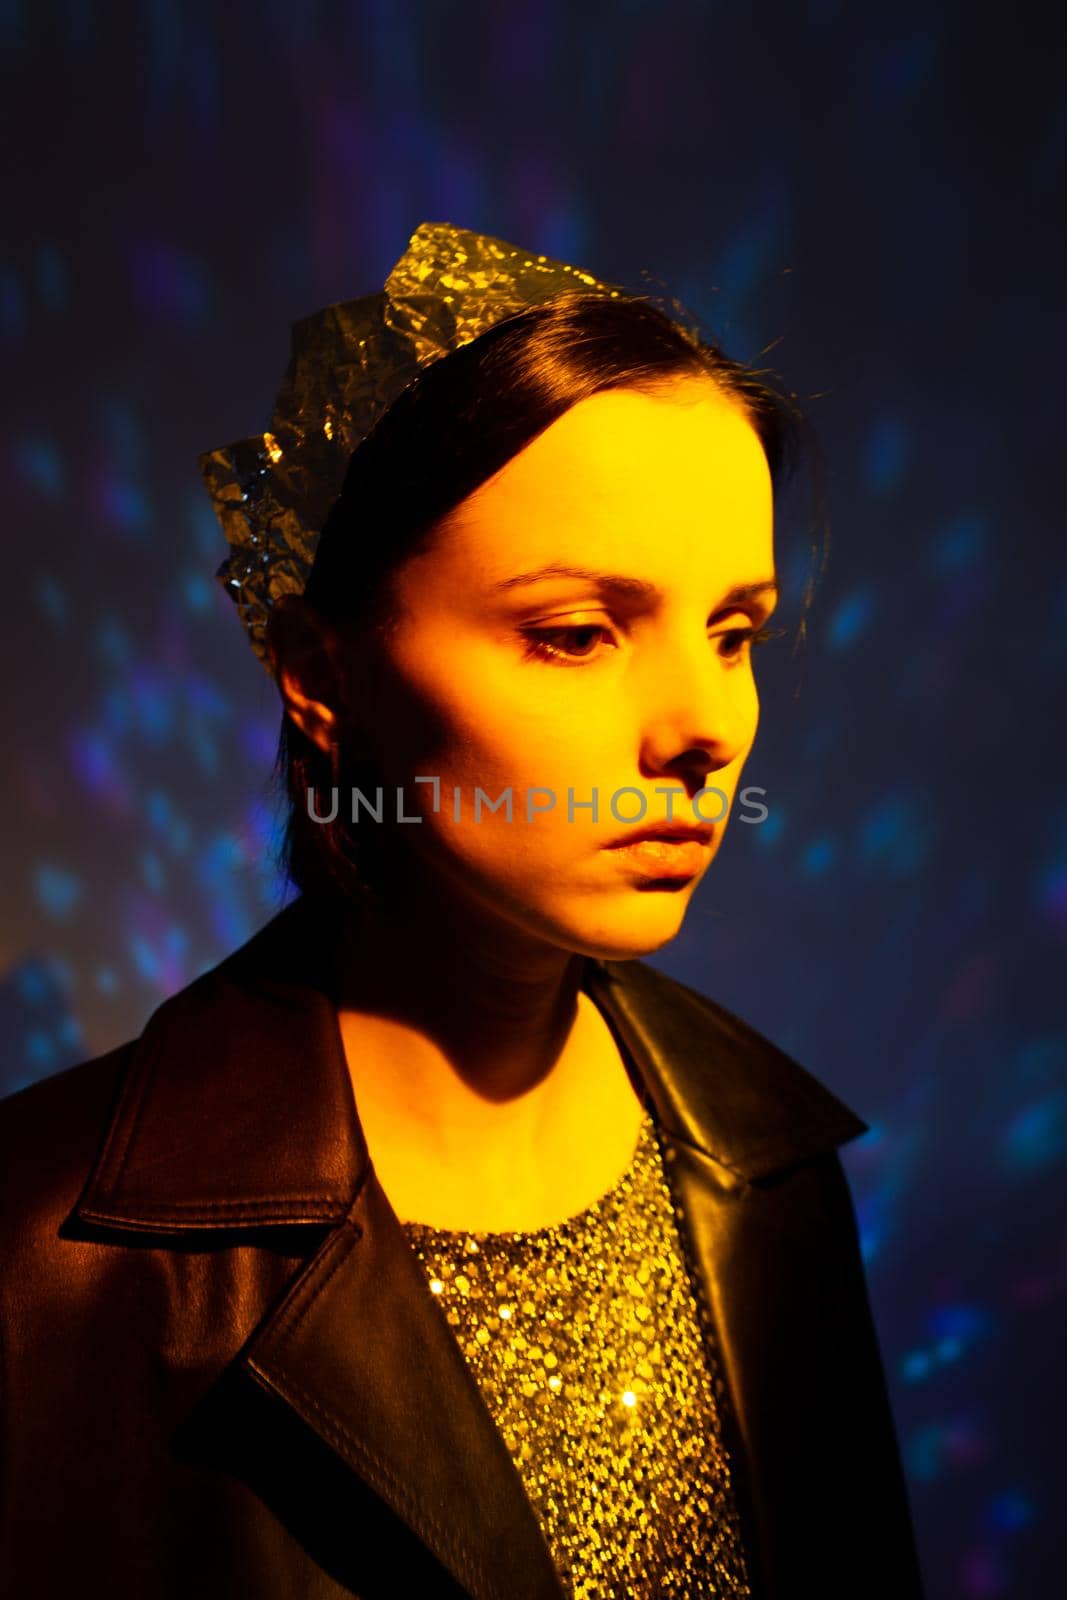 woman with a crown on her head in yellow light, art portrait. High quality photo